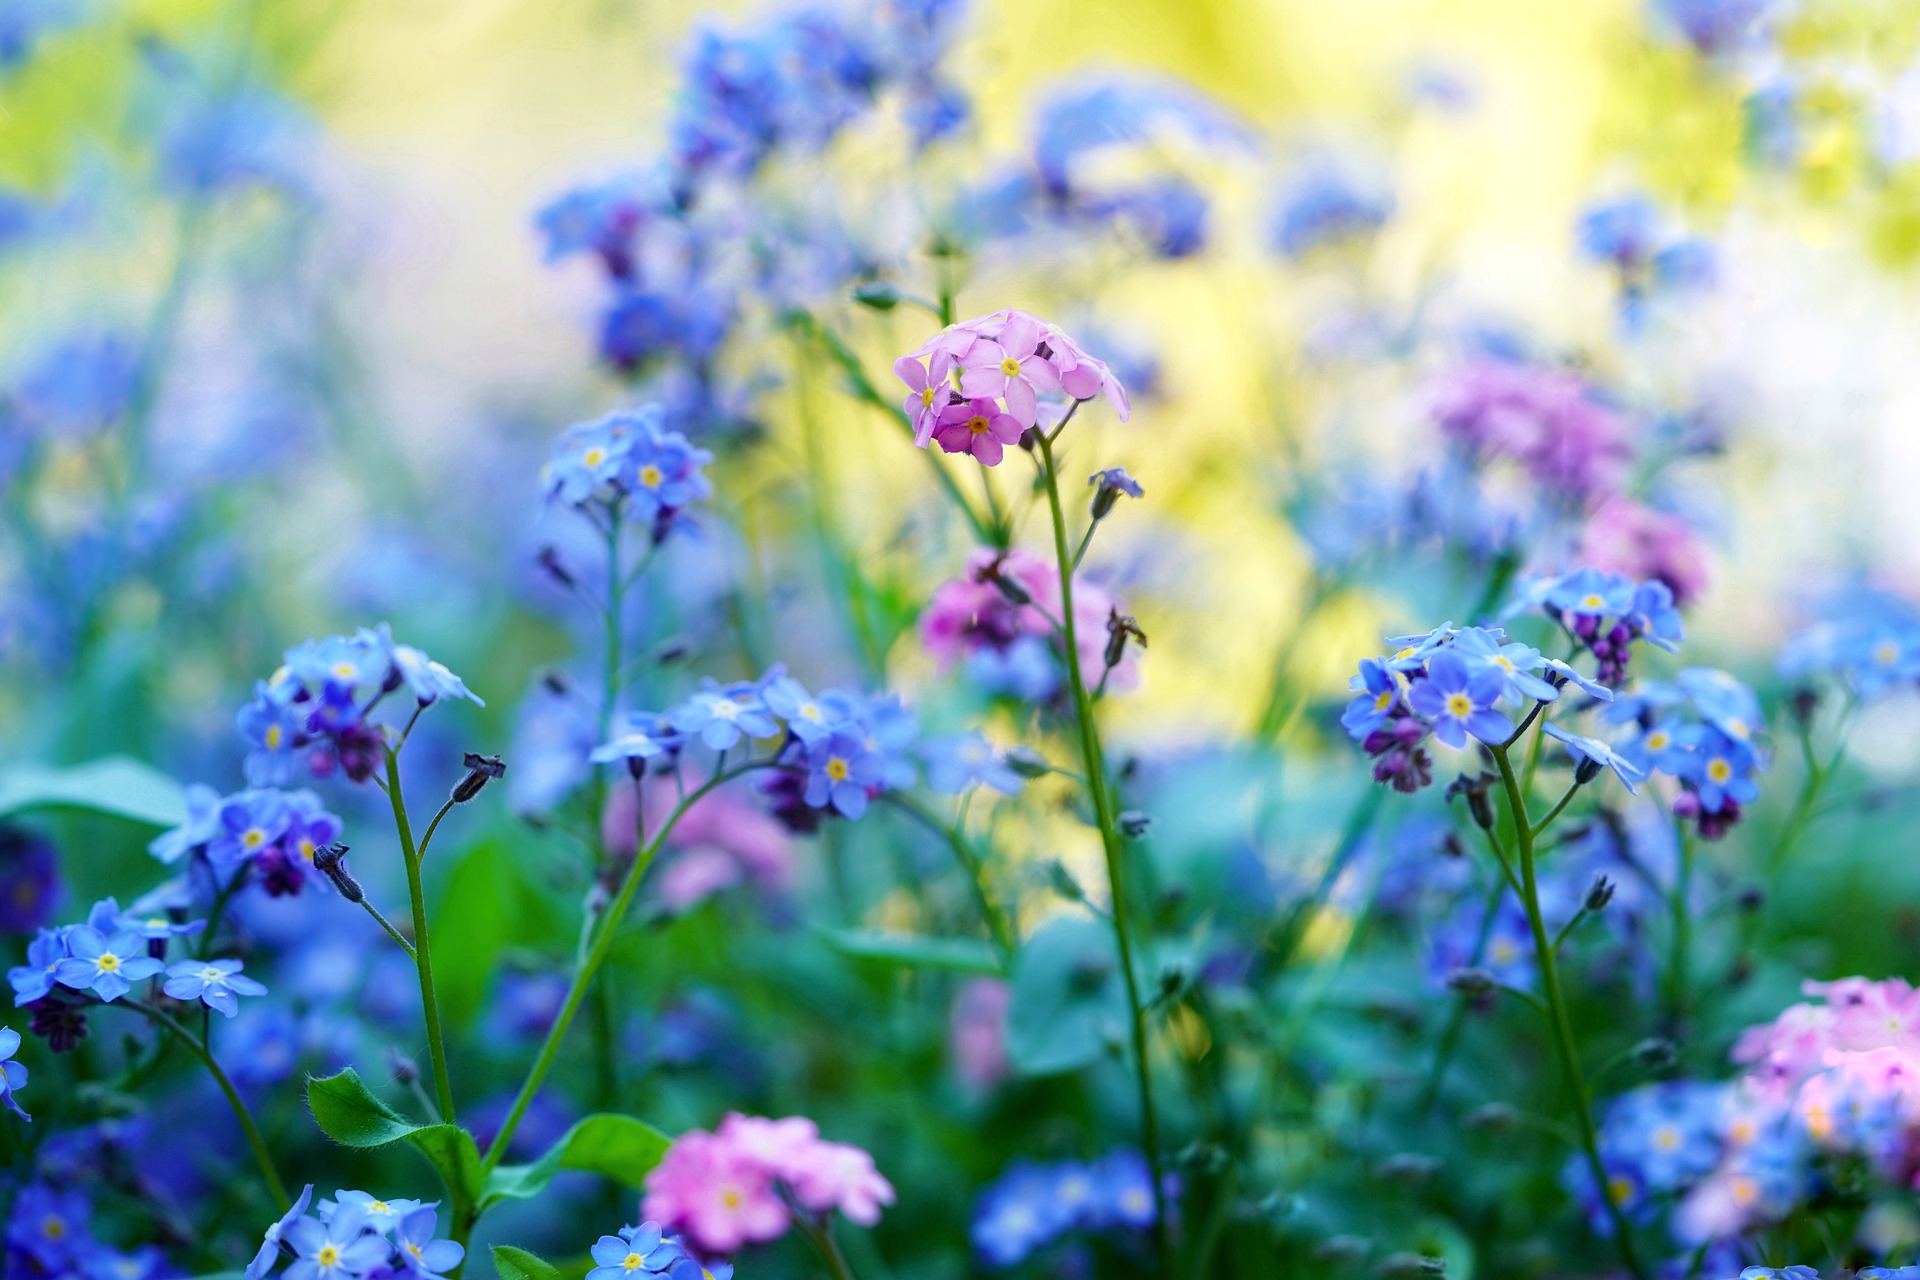 Pink and lavender forget-me-nots.